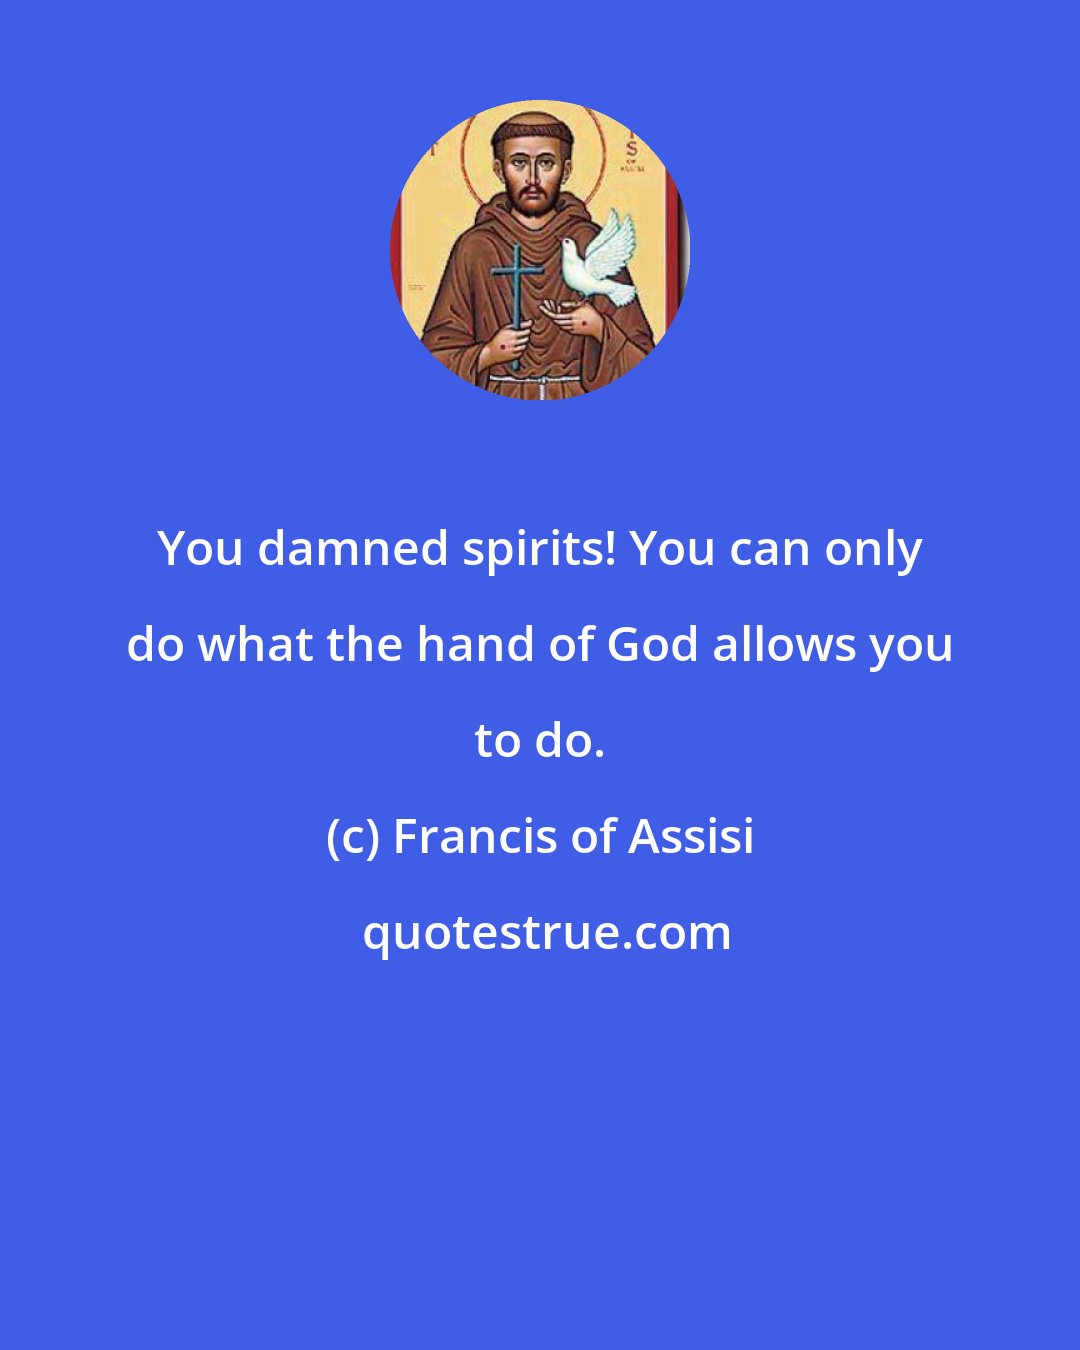 Francis of Assisi: You damned spirits! You can only do what the hand of God allows you to do.